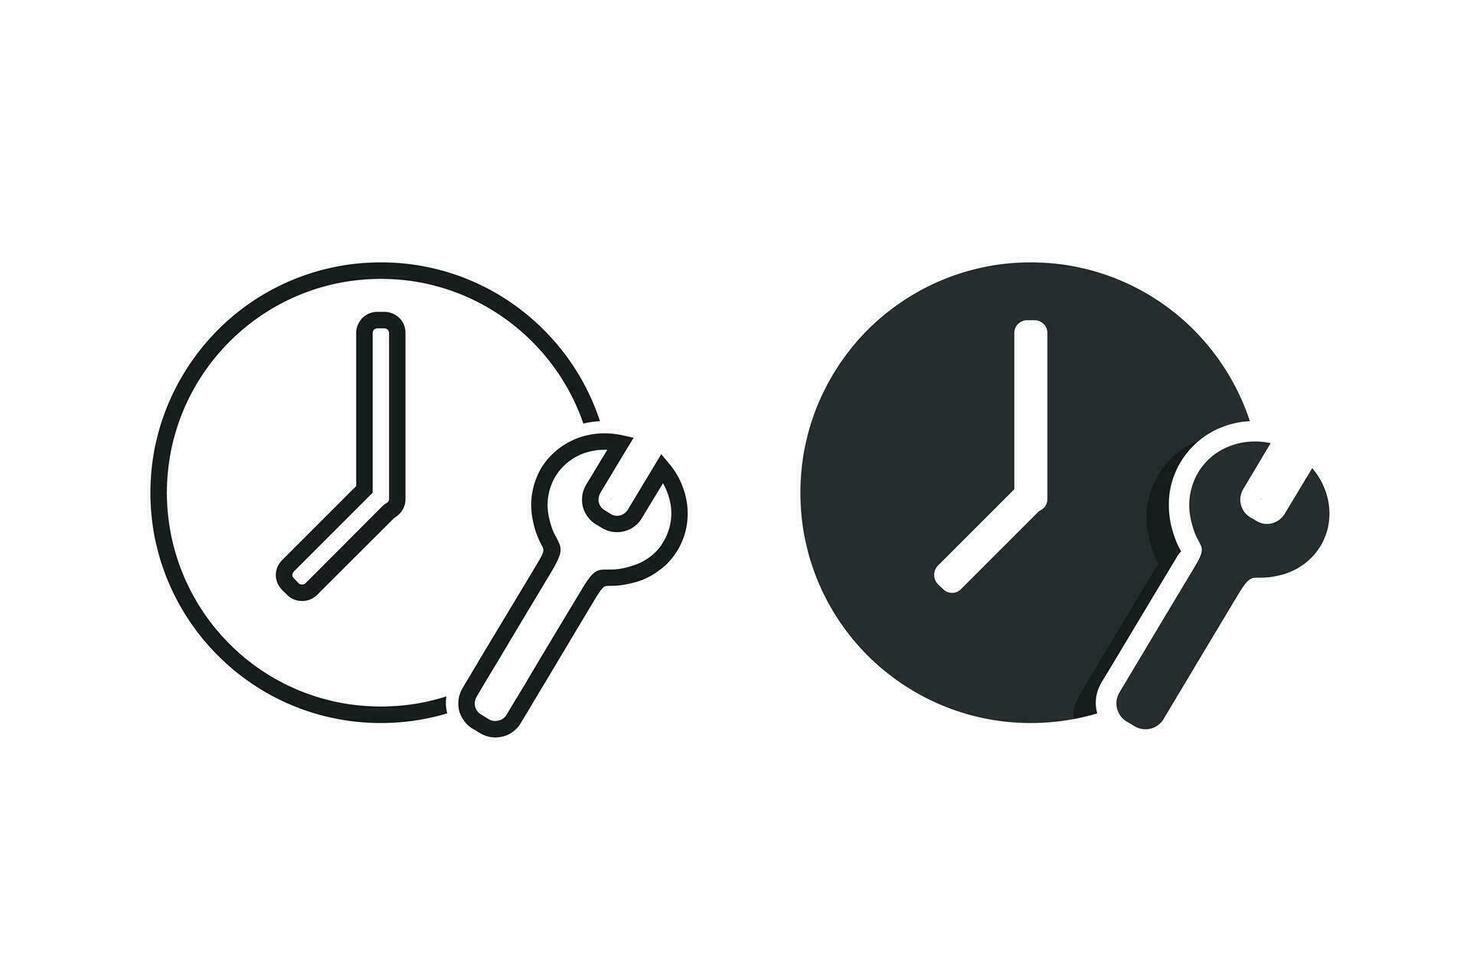 Wrench time icon. Illustration vector